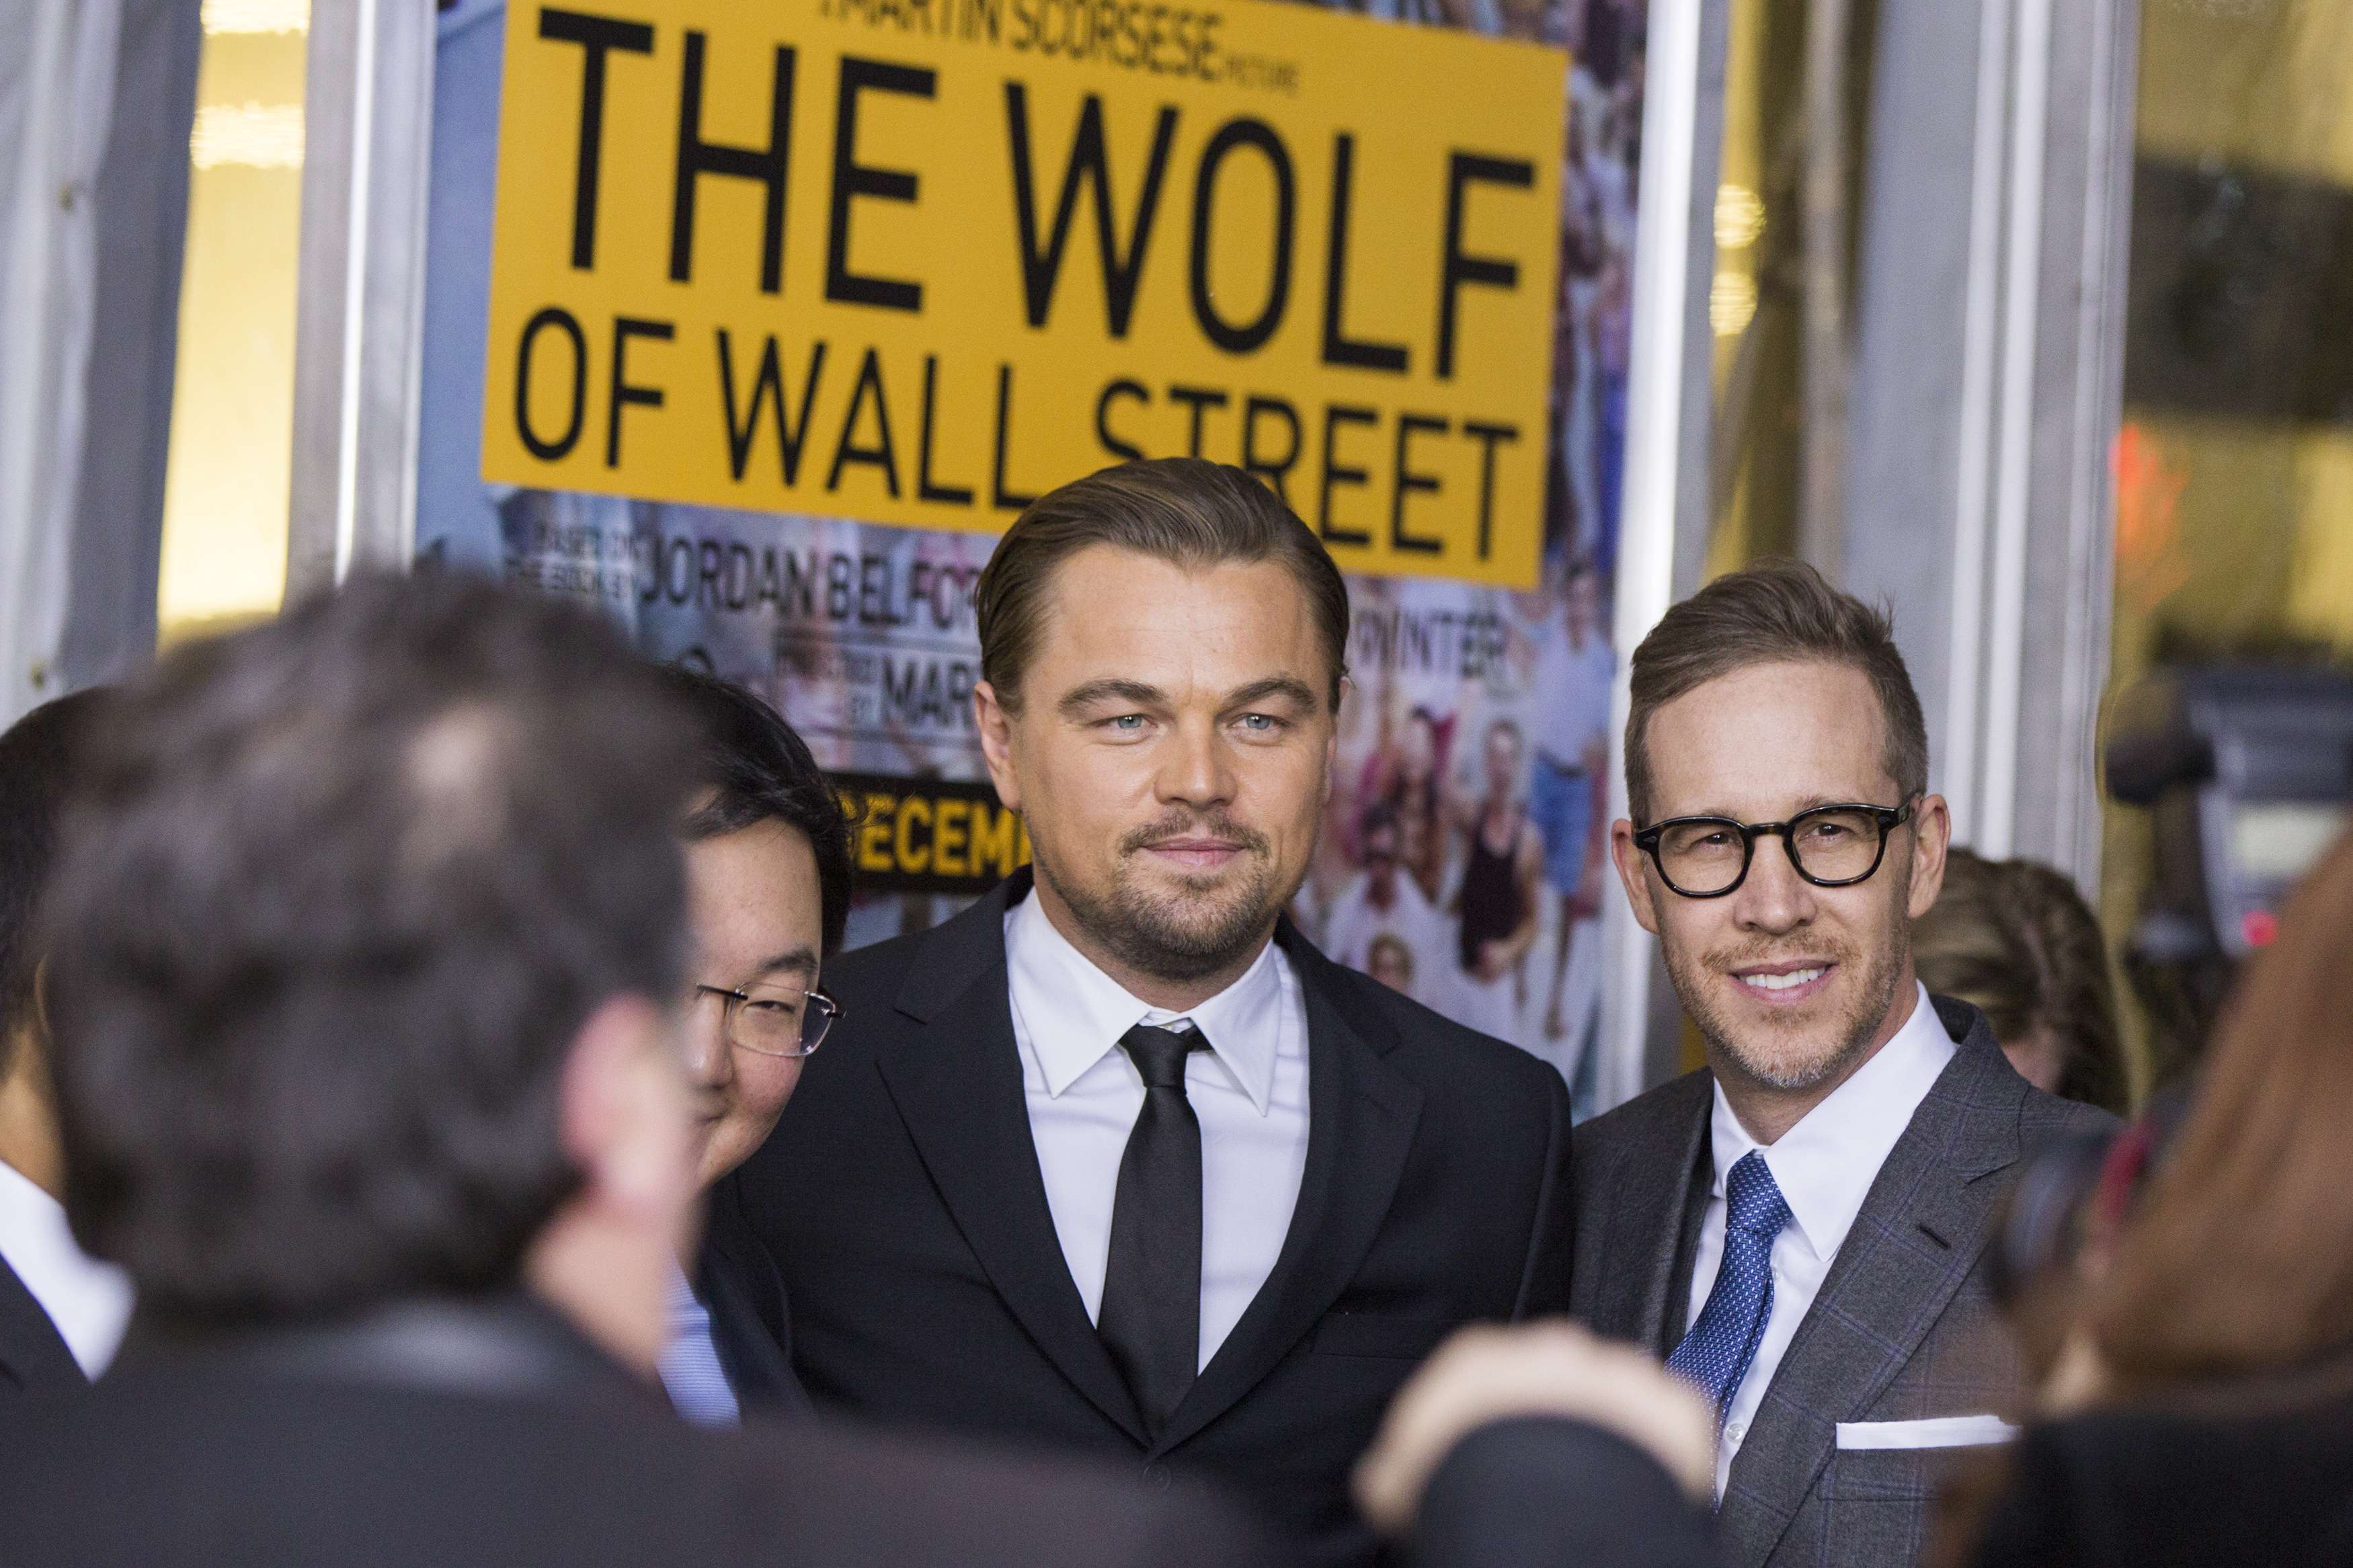 The Wolf of Wall Street star Leonard DiCaprio at the film's premiere in New York December 17, 2013. Photo: Reuters